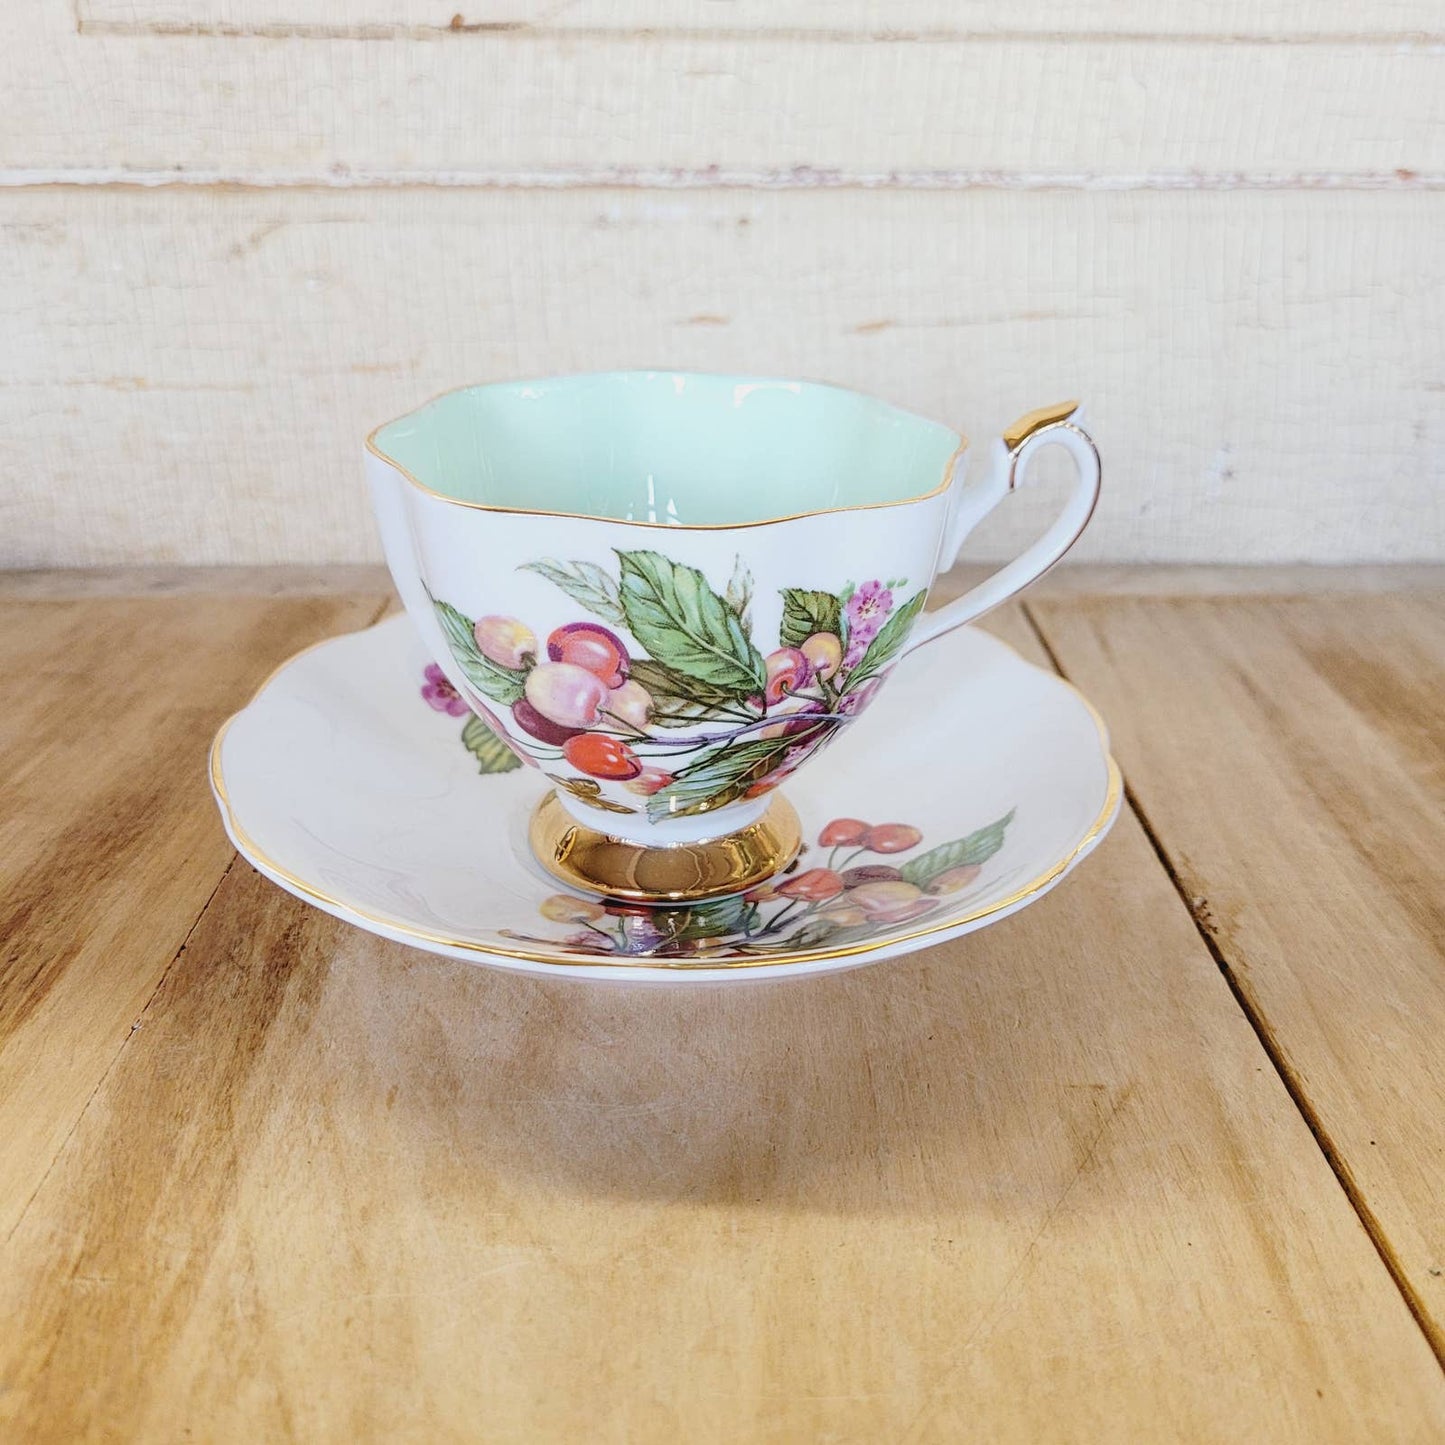 Vintage Queen Anne Bone China Teacup And Saucer Cherries